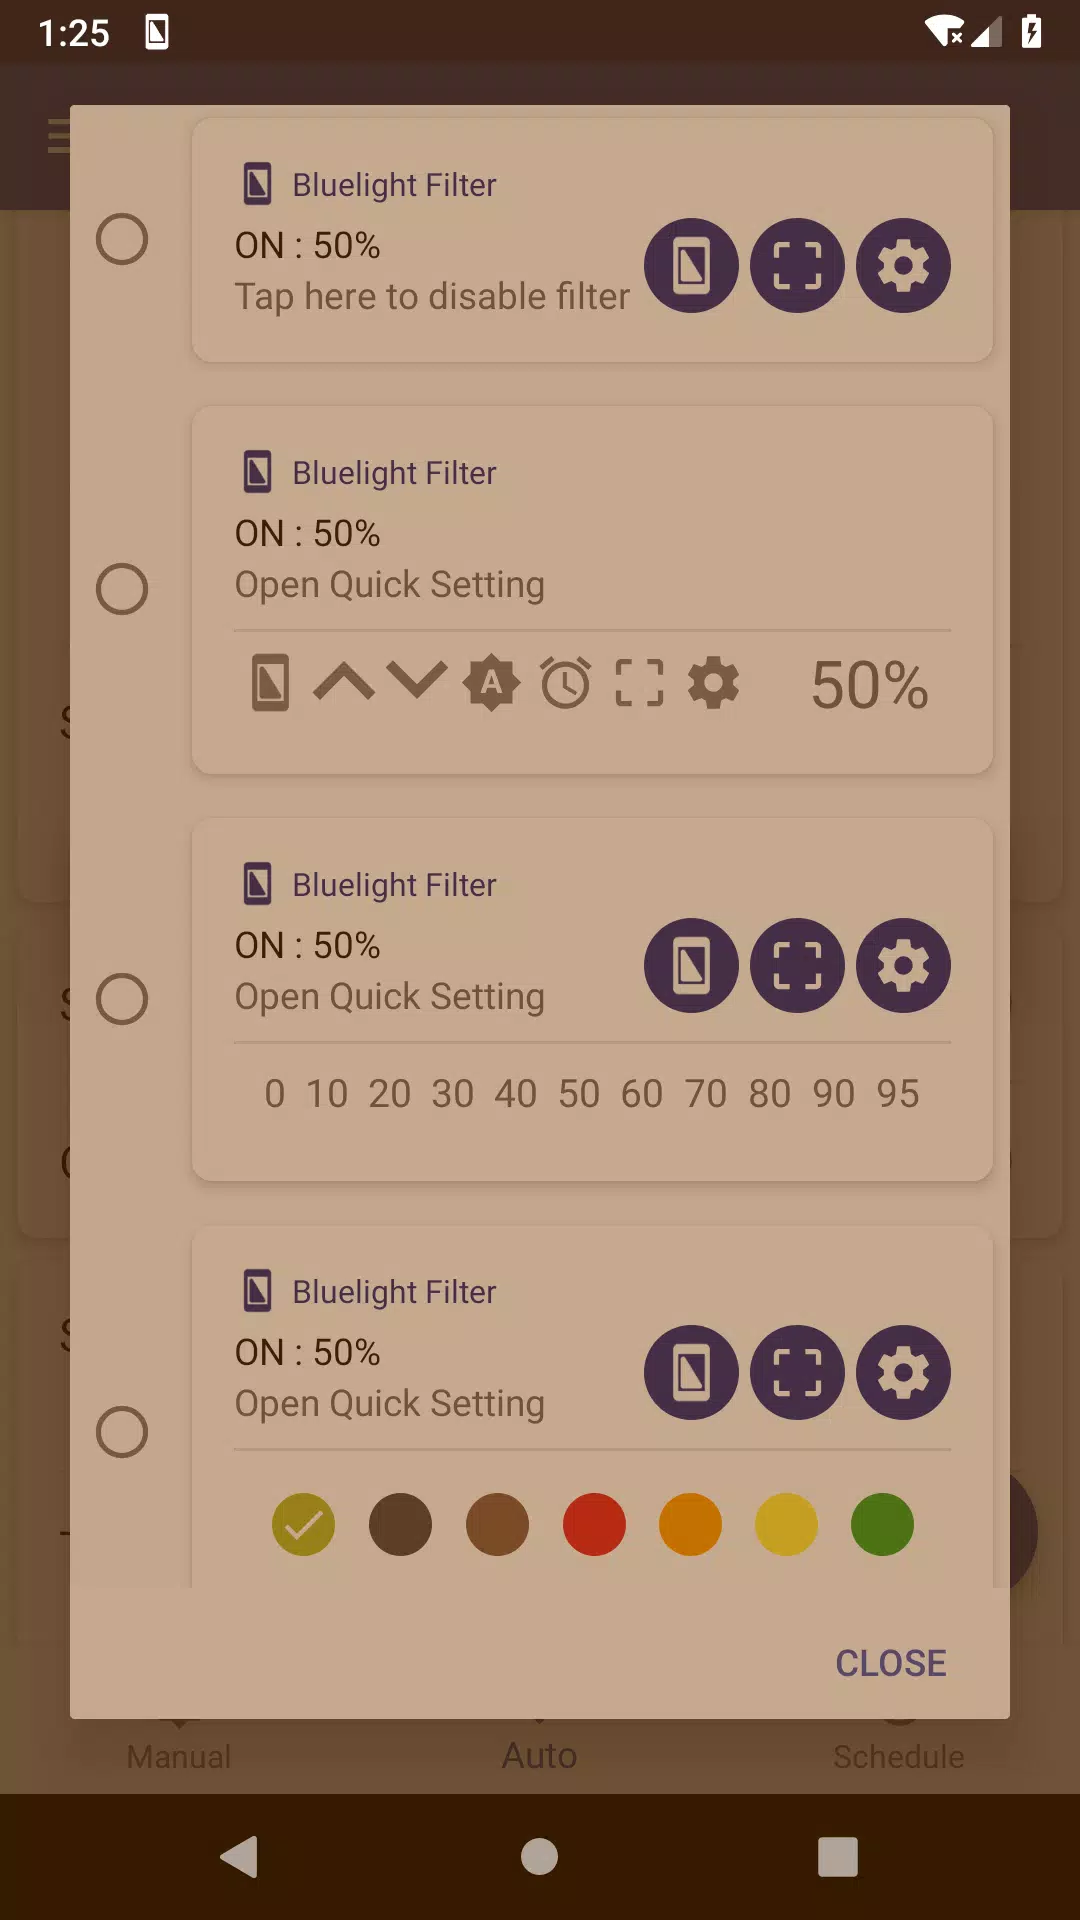 Bluelight Filter for Android - APK Download